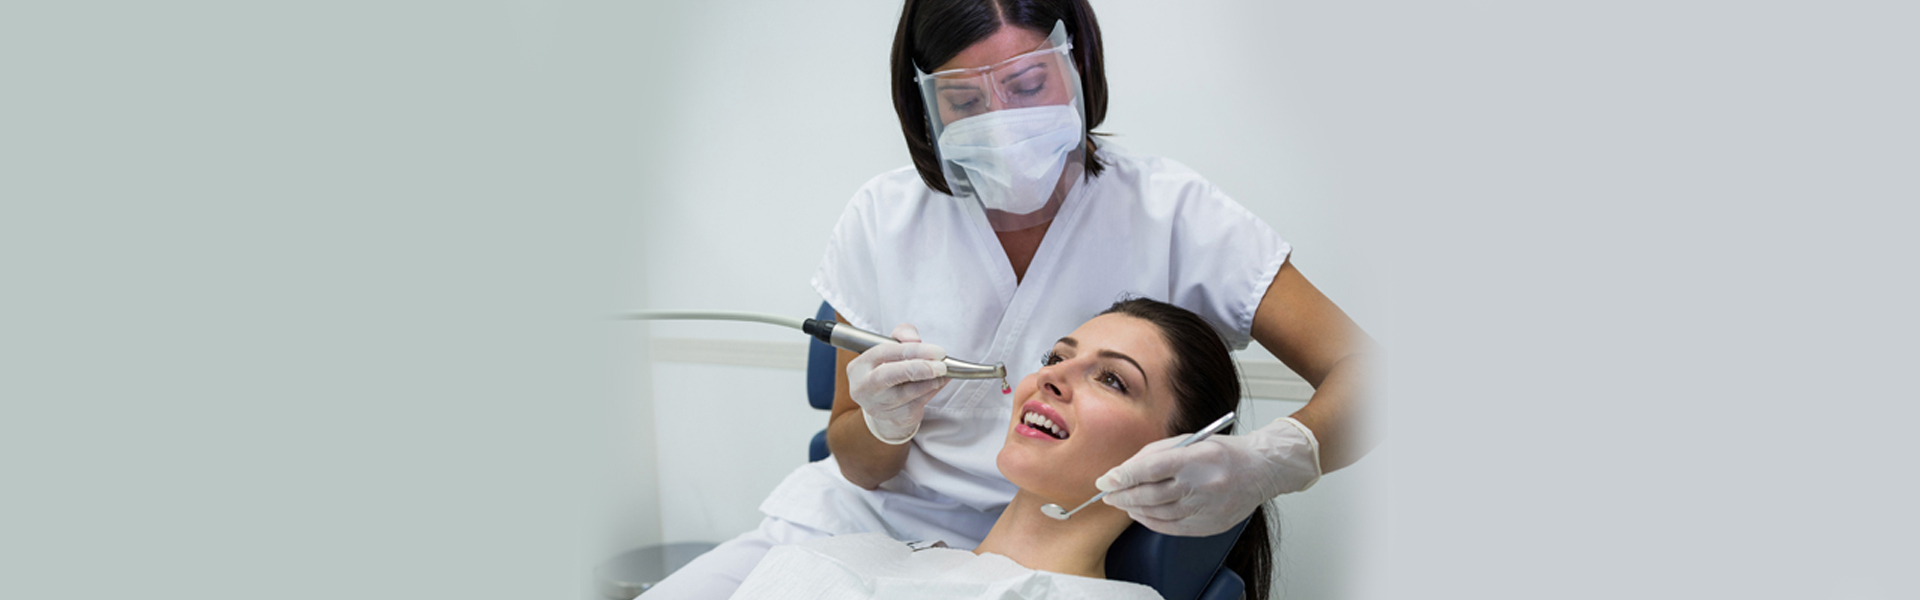 The Importance of Periodontal Health: Why Regular Visits to the Periodontist are Critical